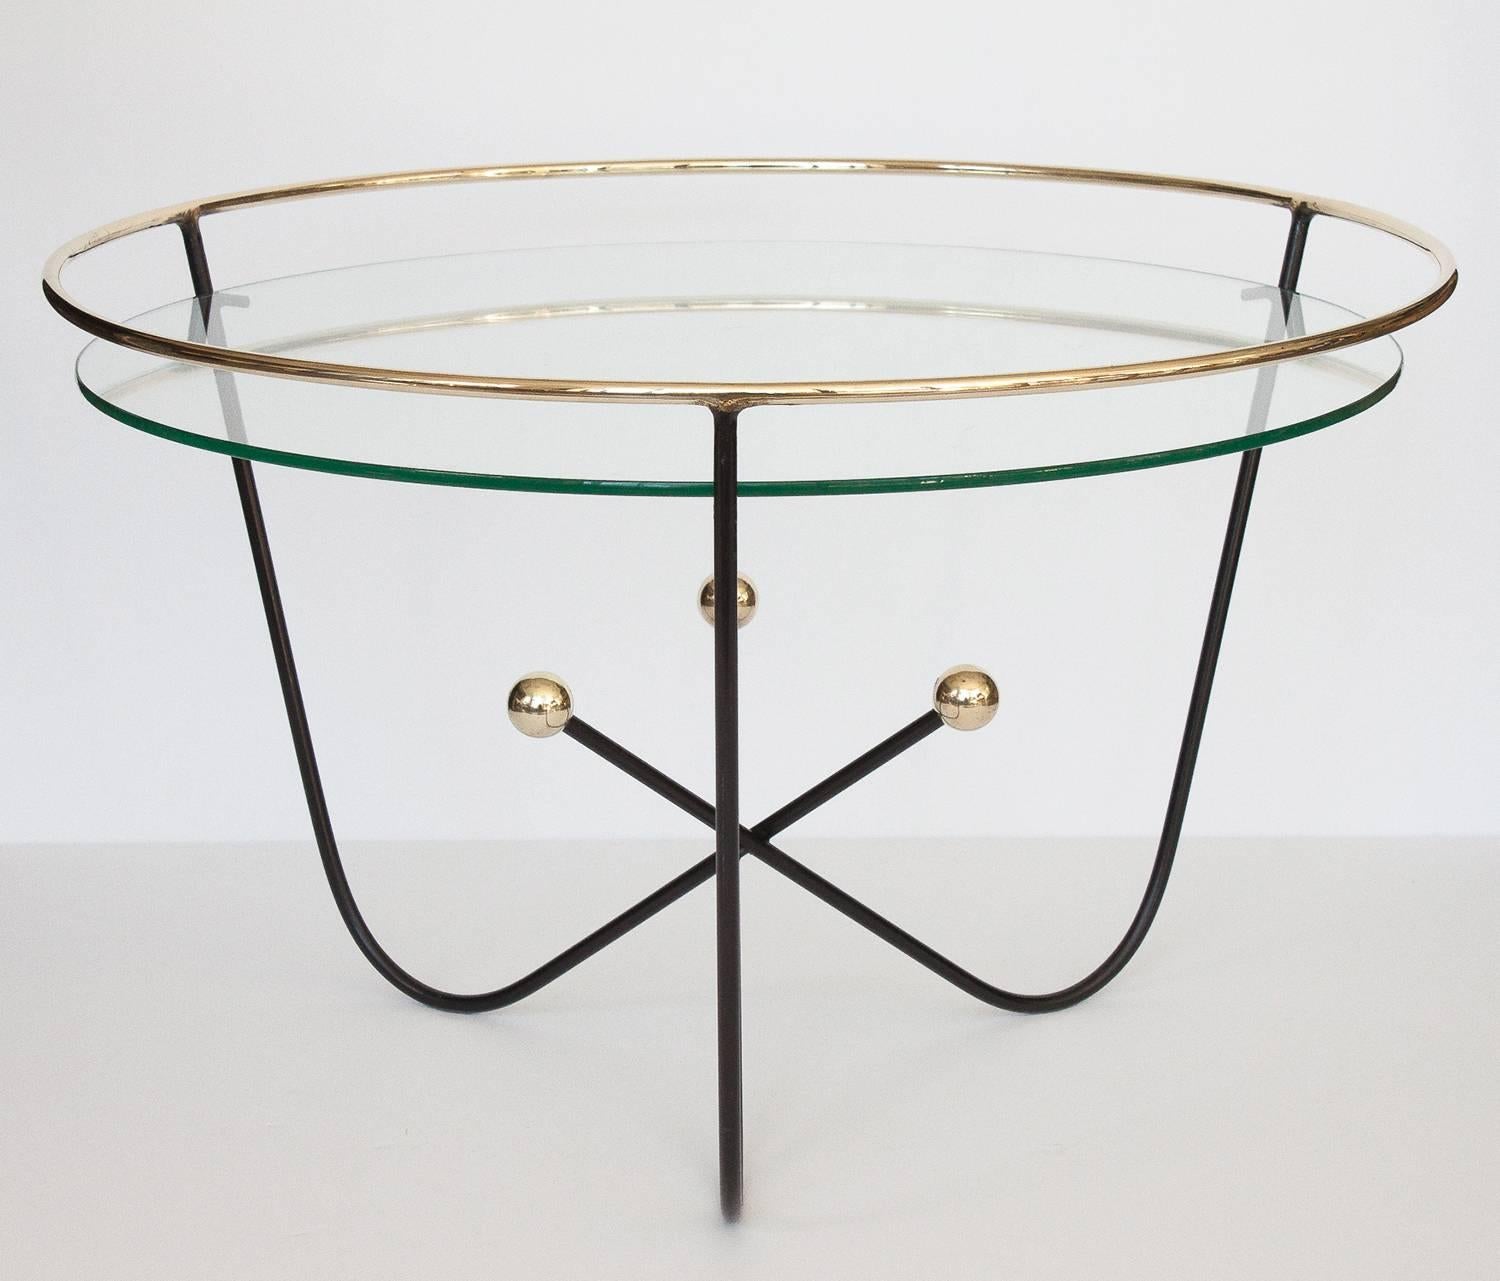 Enameled Black and Brass Cocktail Table by Edward Ihnatowicz